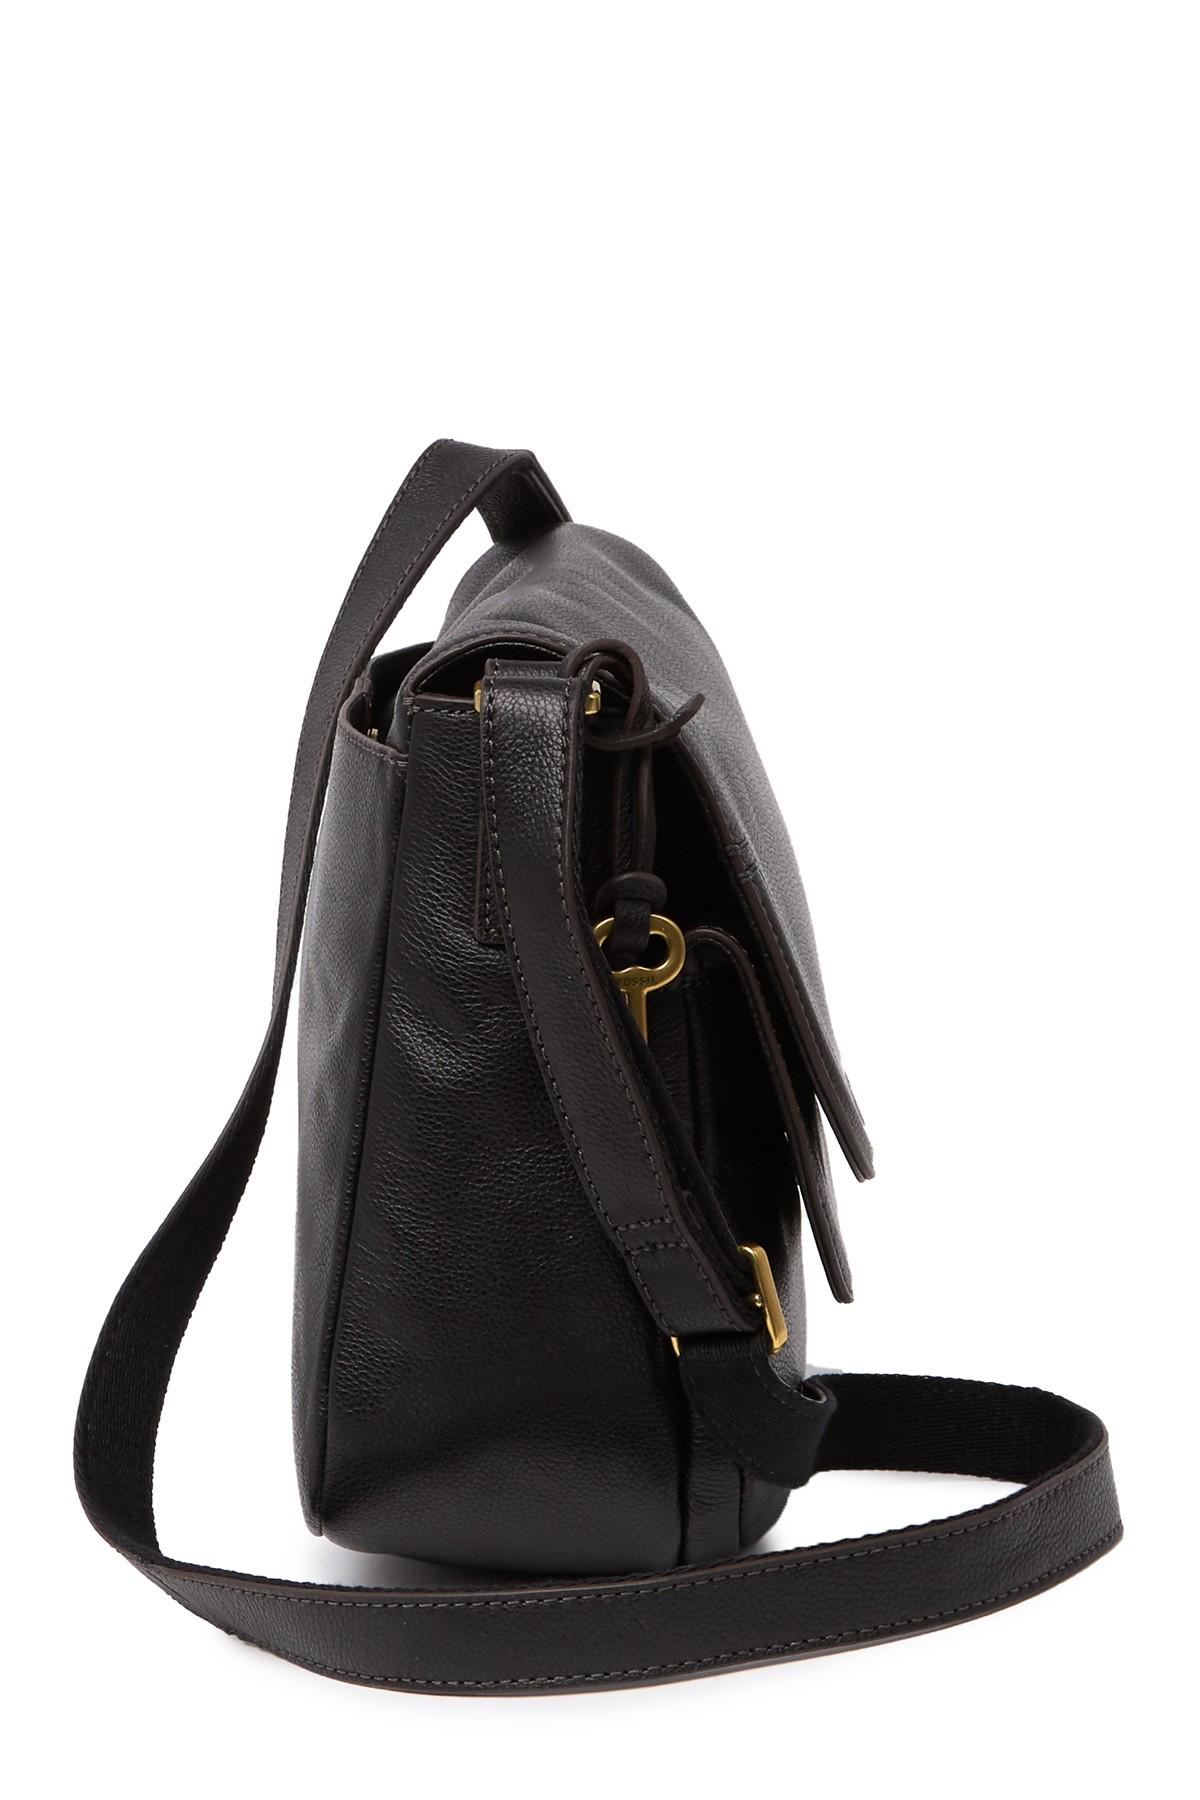 Fossil Peyton Large Leather Crossbody Bag in Black - Lyst